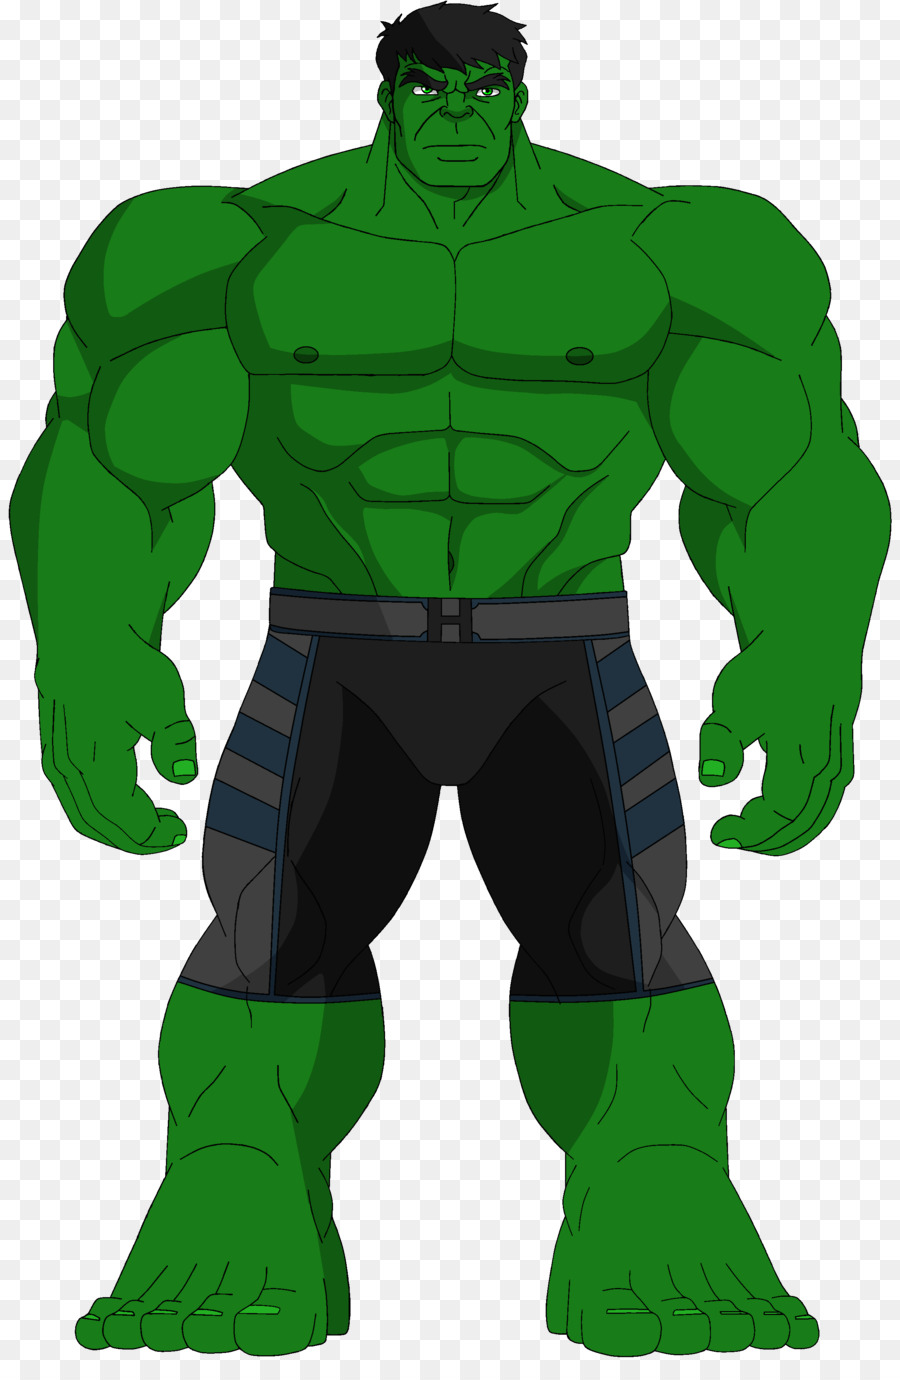 Barbell clipart hulk, Barbell hulk Transparent FREE for download on